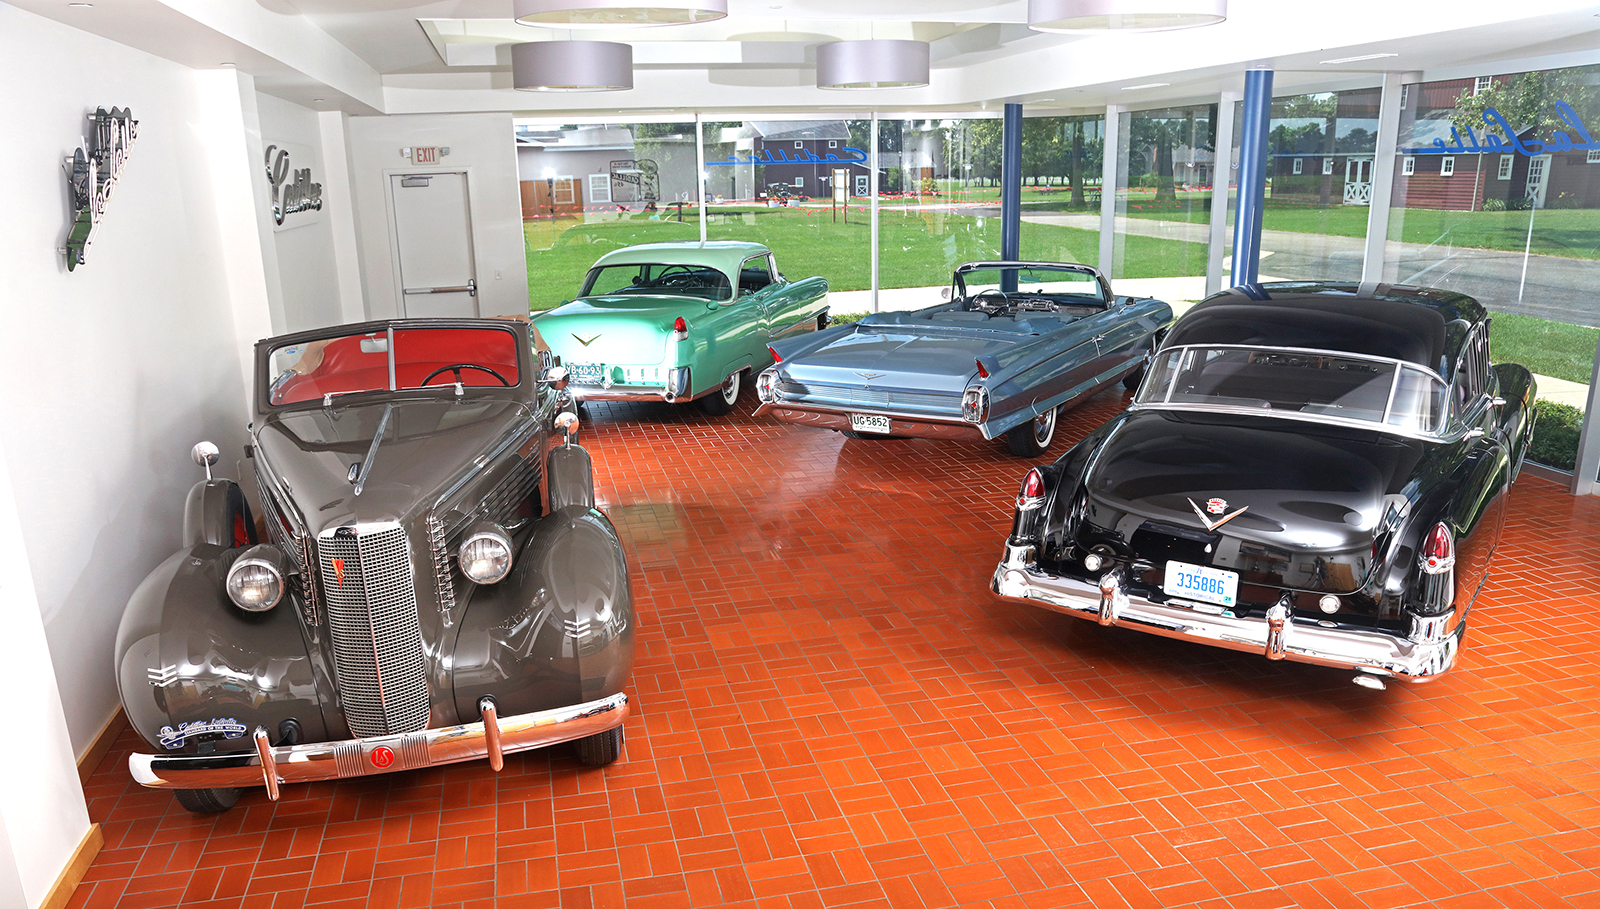 Cadillac - Lasalle Club Museum & Research Center